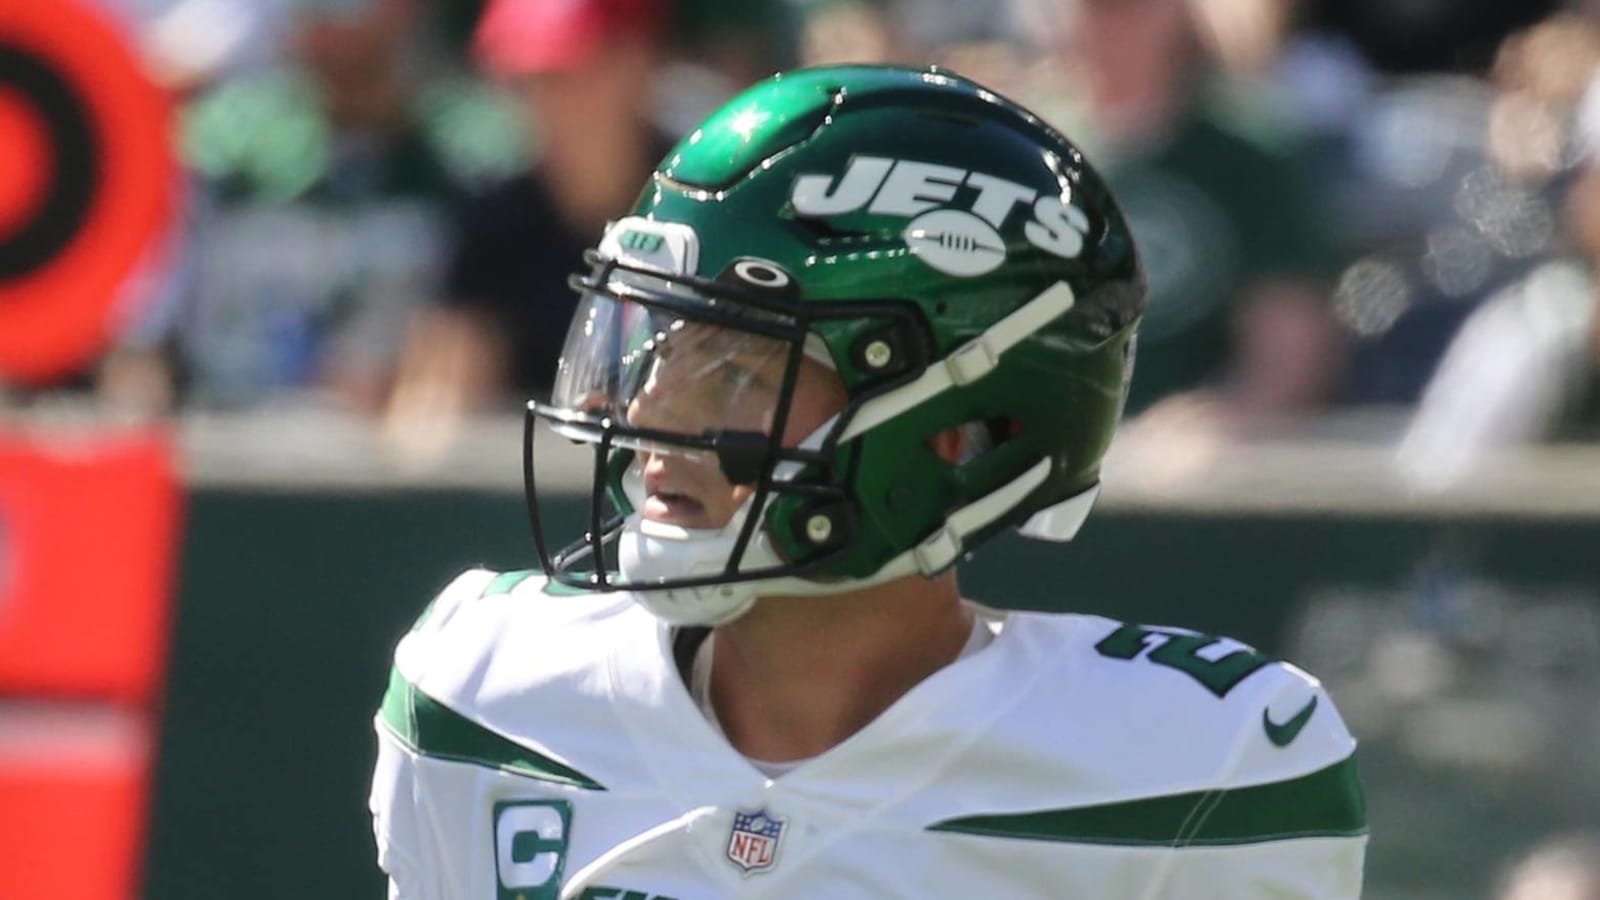 Jets rookie QB Zach Wilson responds to the ‘seeing ghosts’ narrative